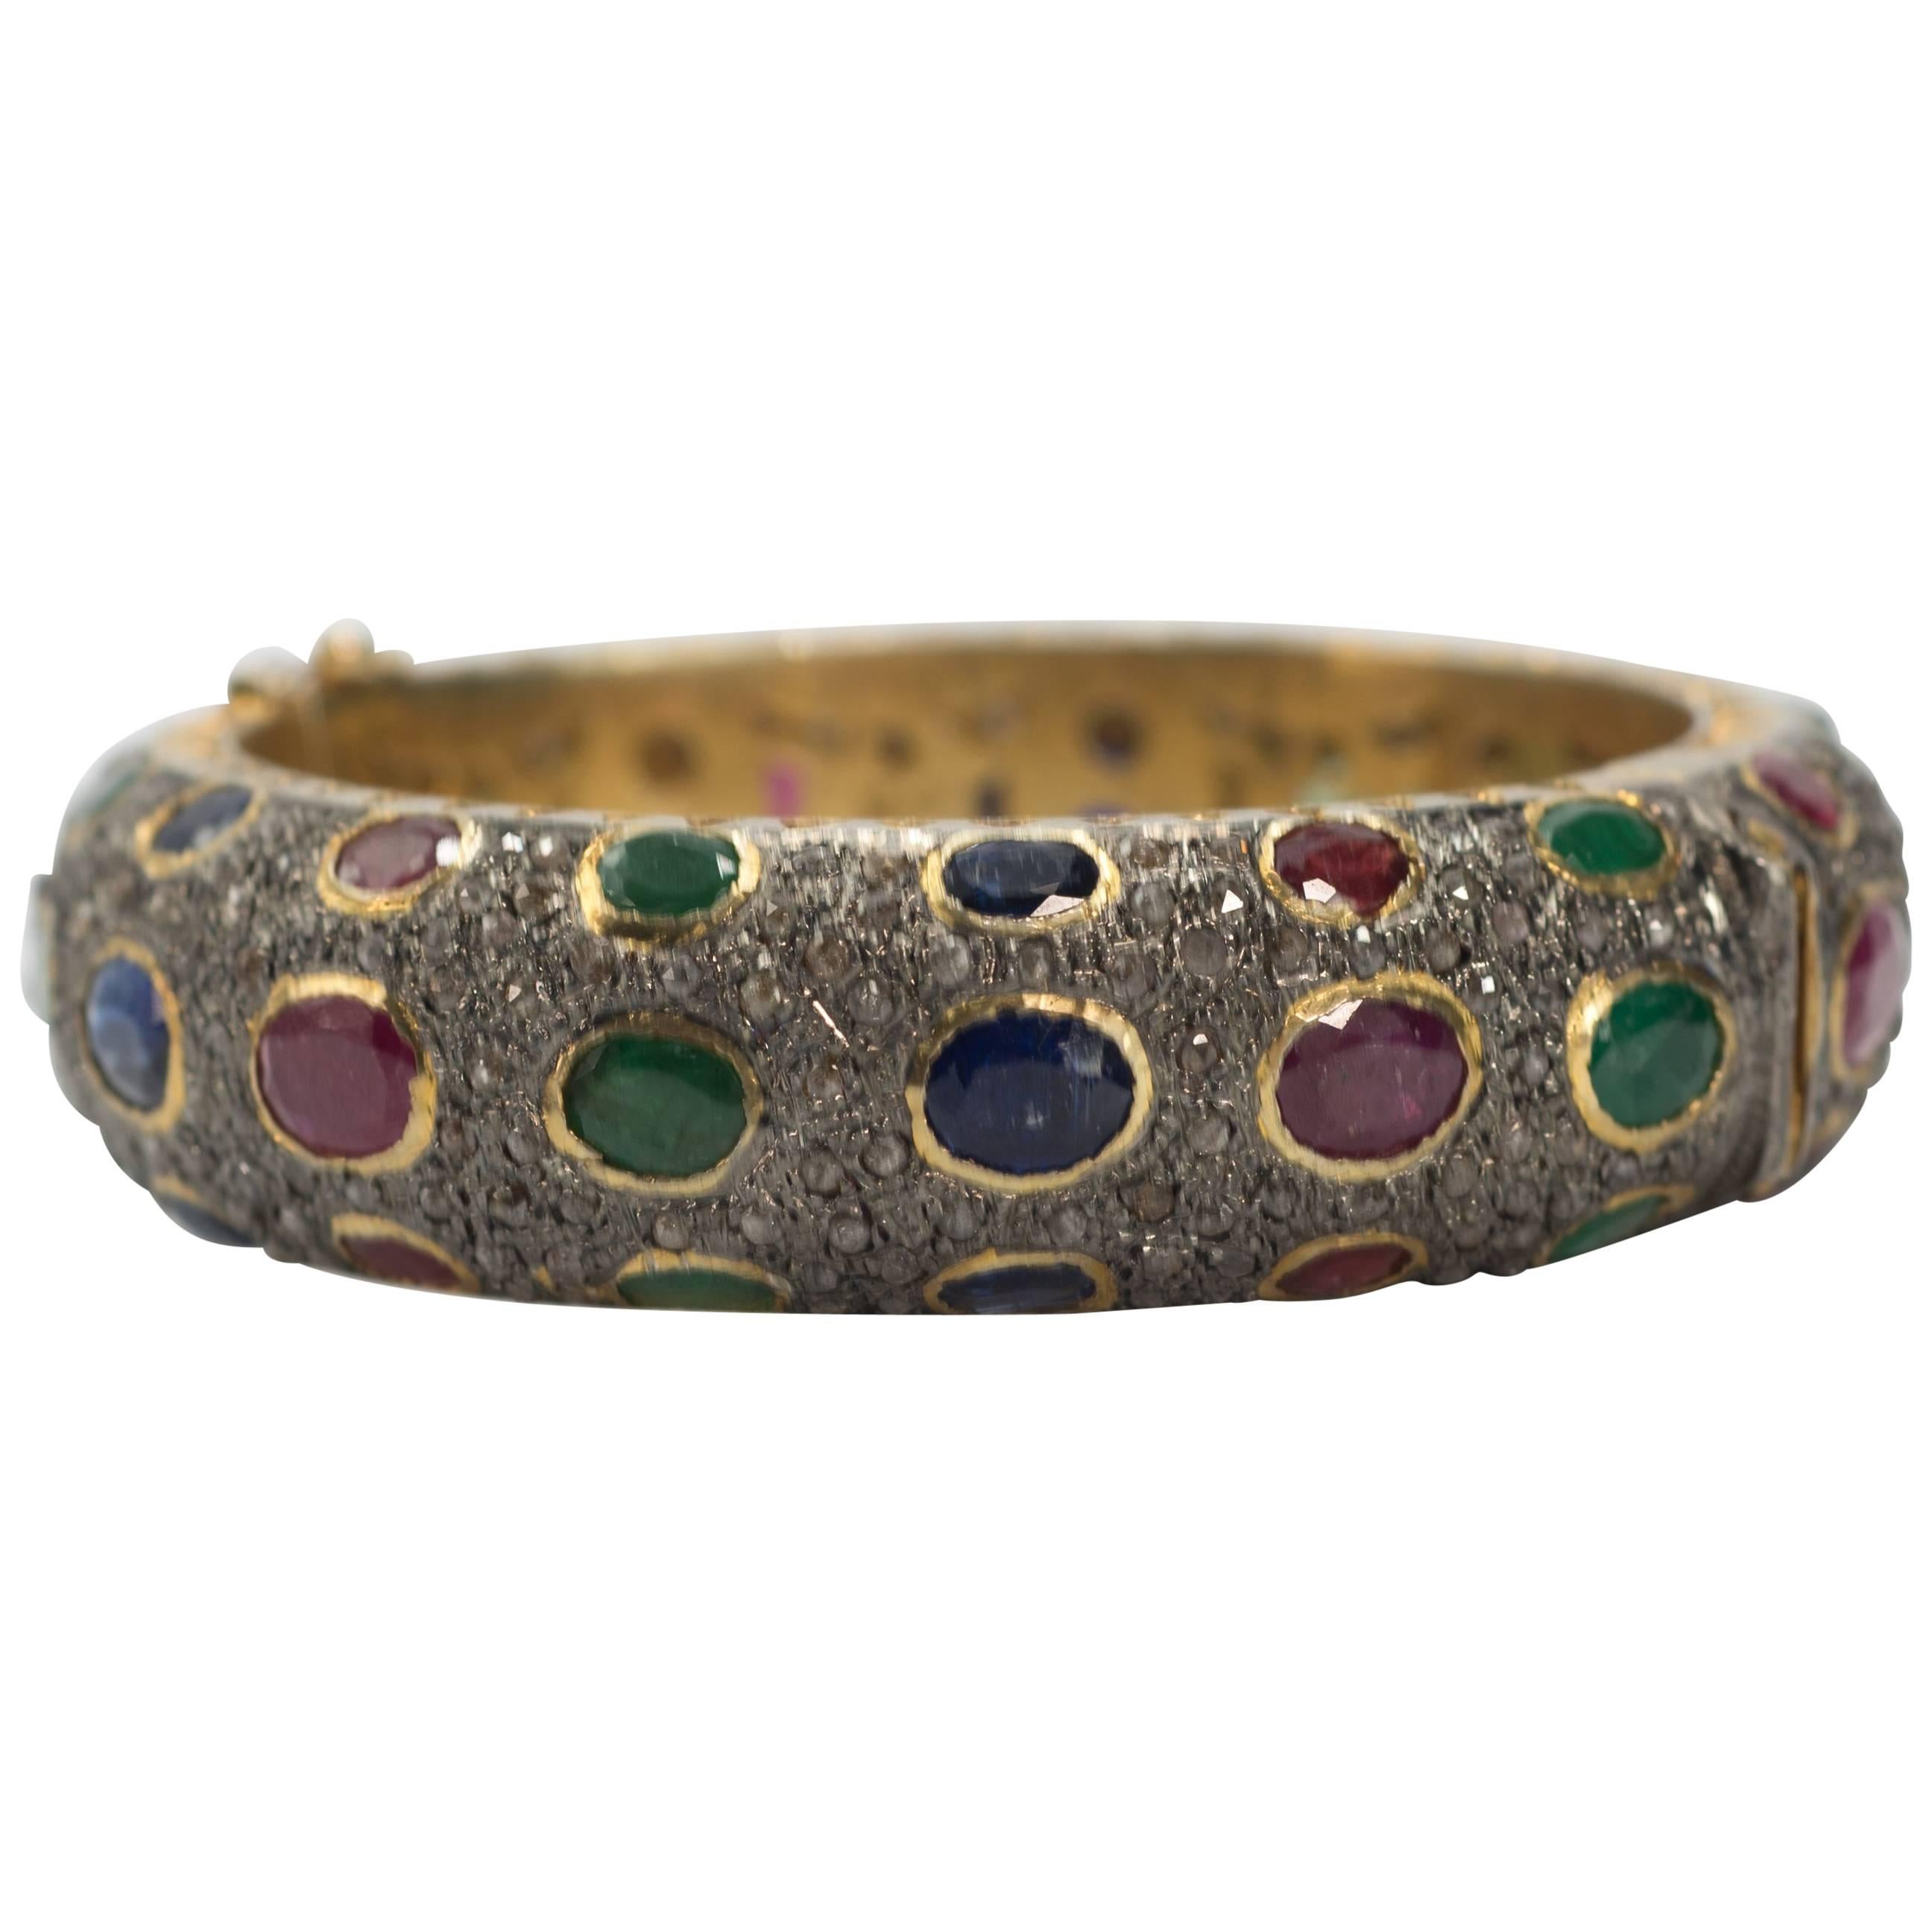 Antique Cut Diamond Emerald Ruby Sapphire Bombe Hinged Vermeil Bangle
fits up to 7'' inch wrist easy to open and close  measures one inch around on the top great fabulous look without looking too dressy.